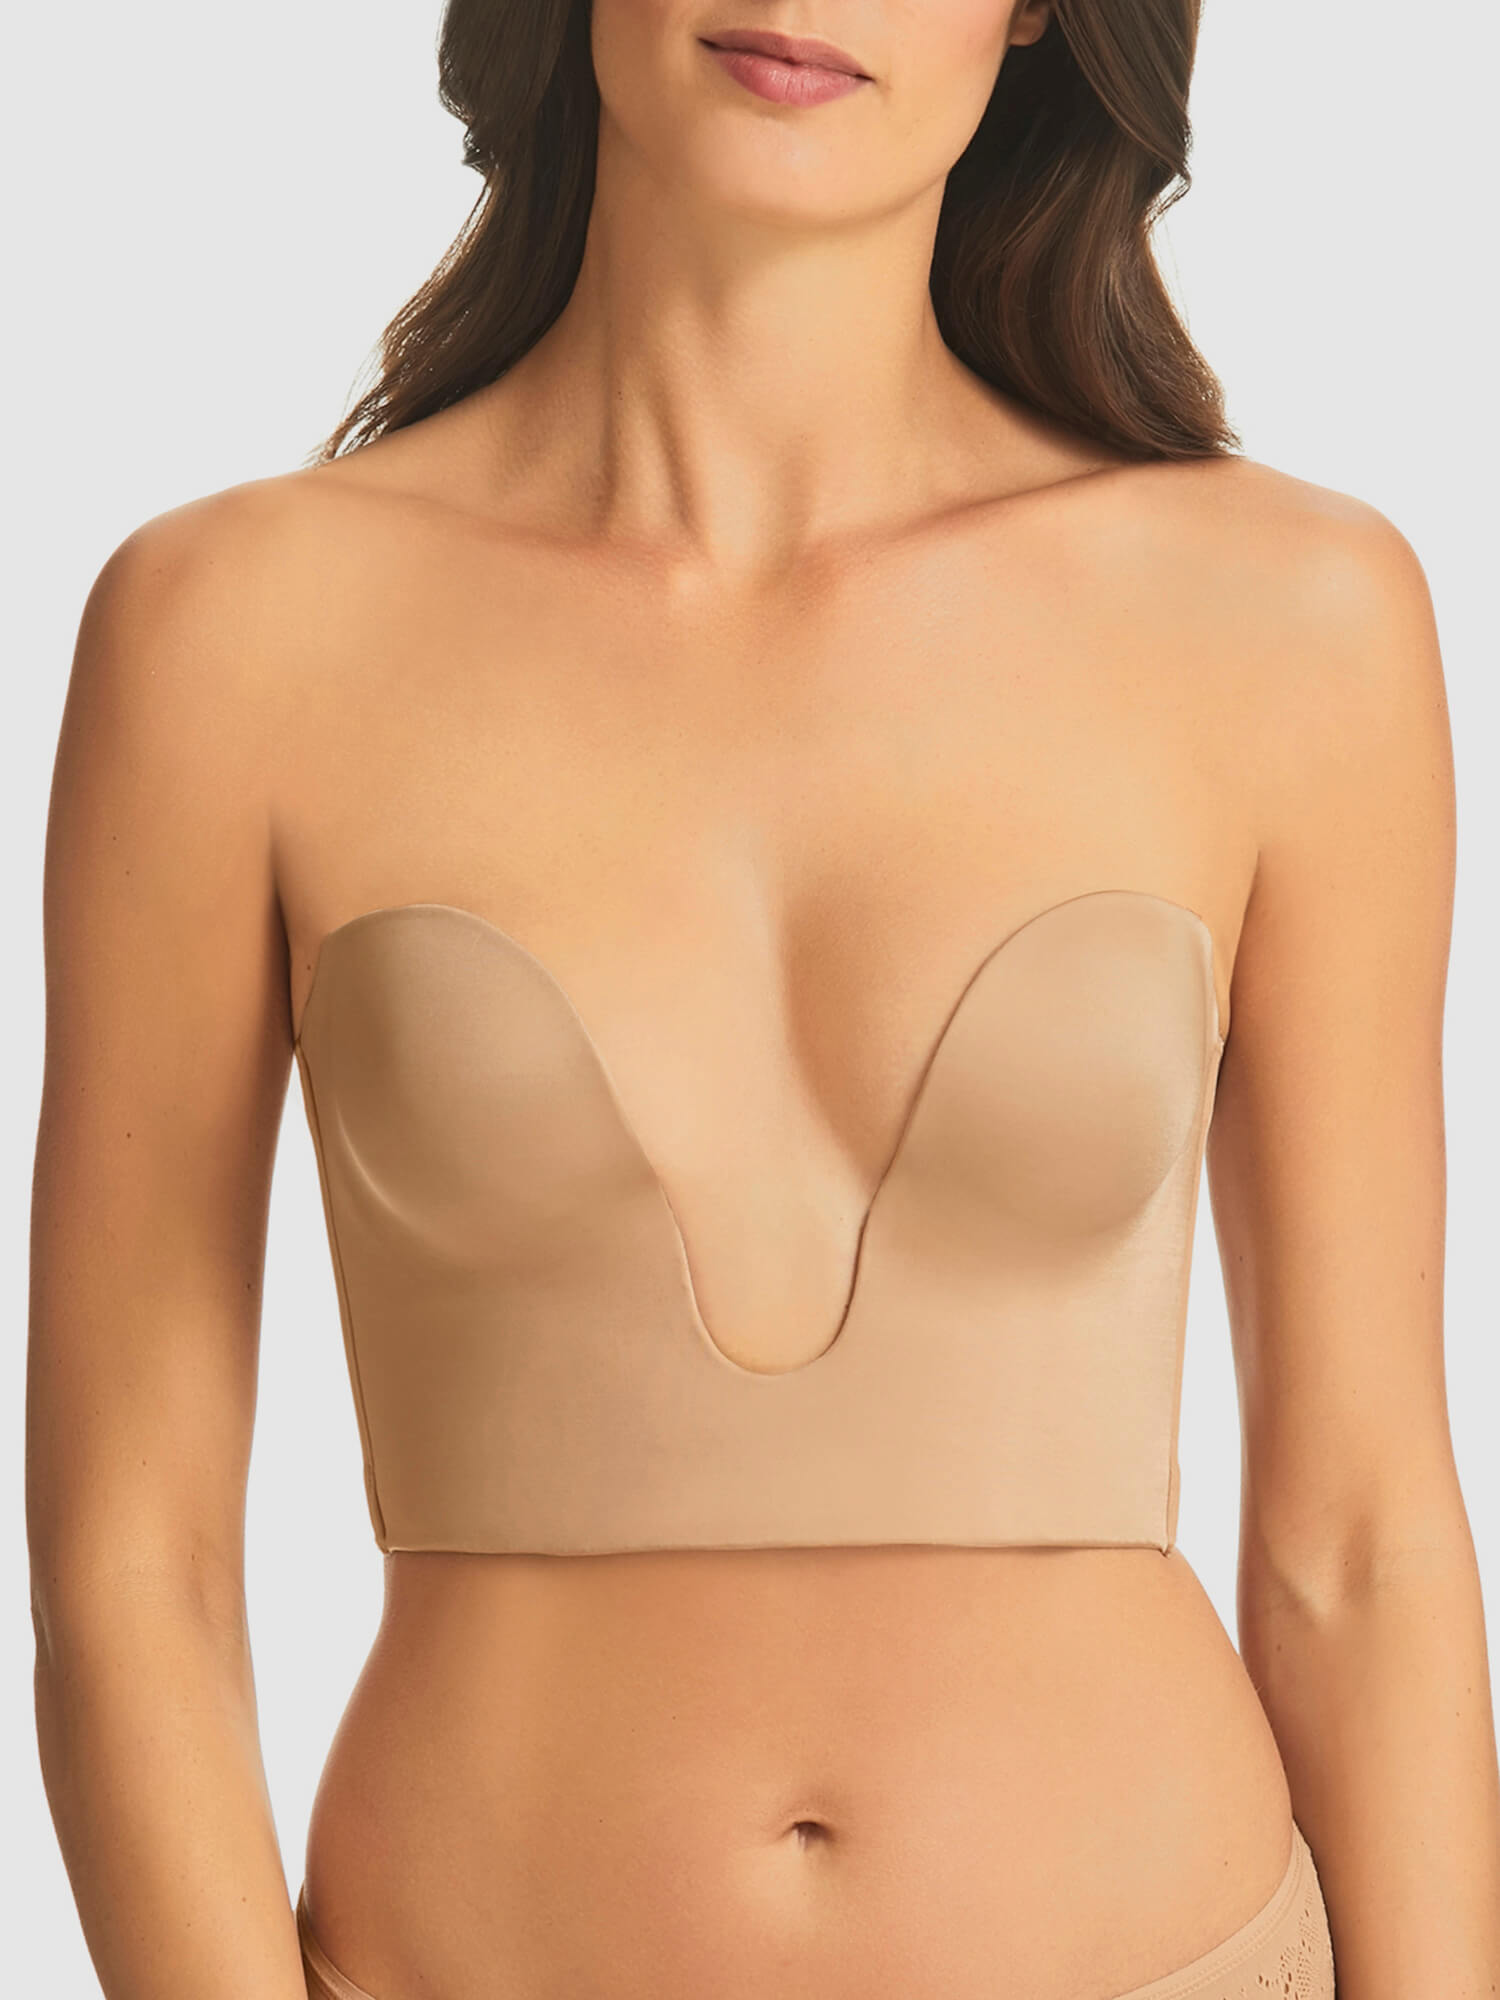 How To Choose Wedding Shapewear - Look Perfect in Your Dress – The